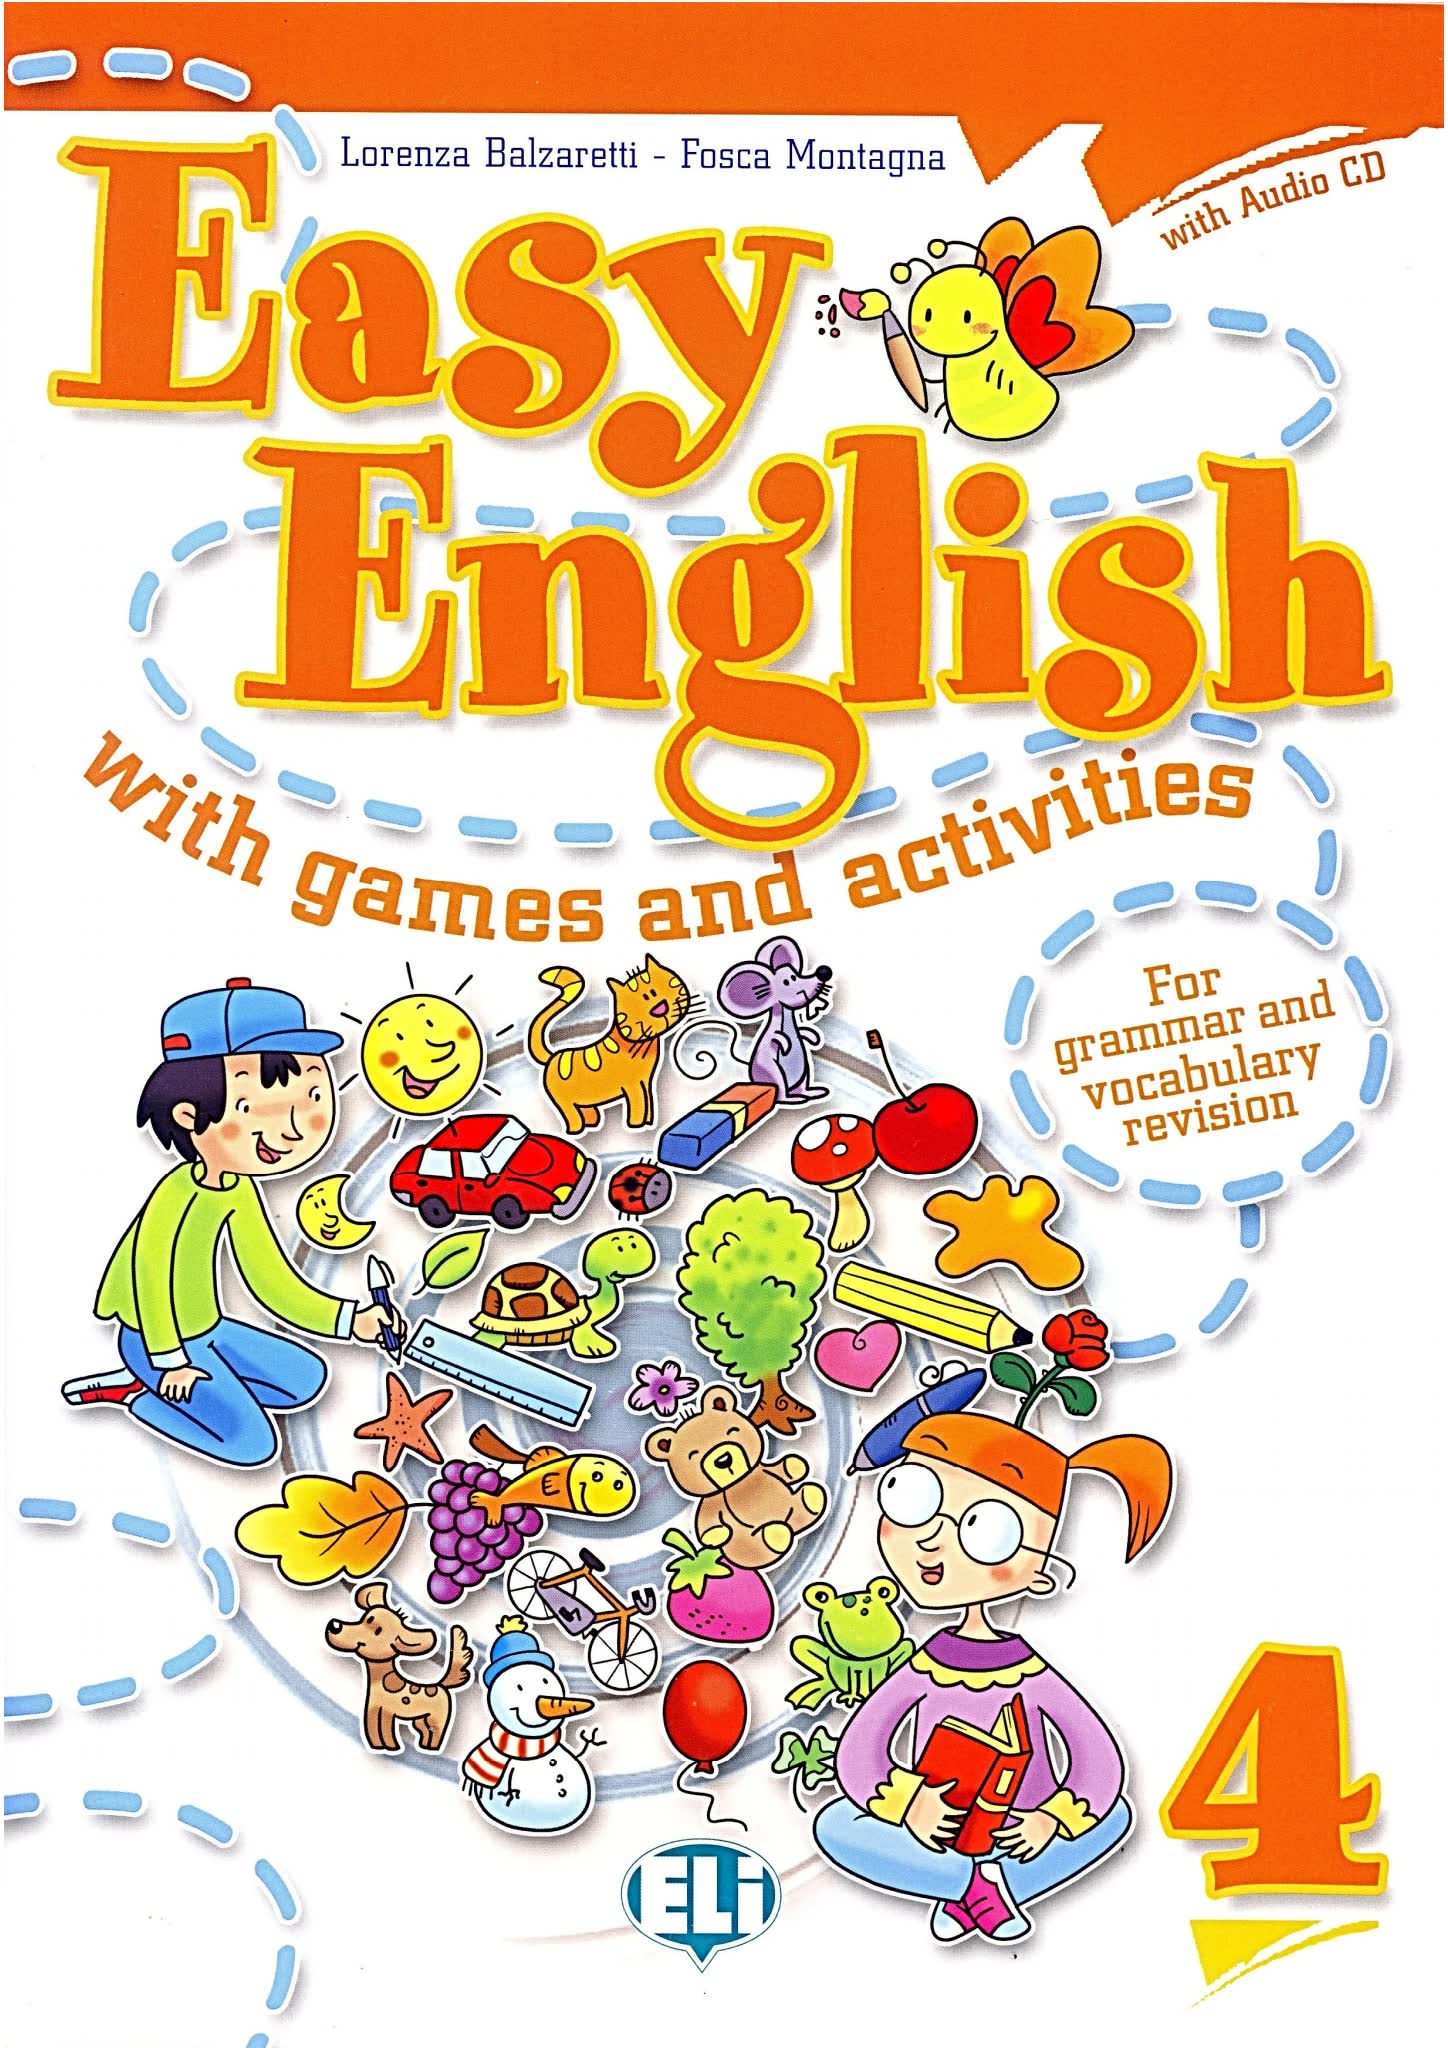 Easy_English_with_games_and_activities0